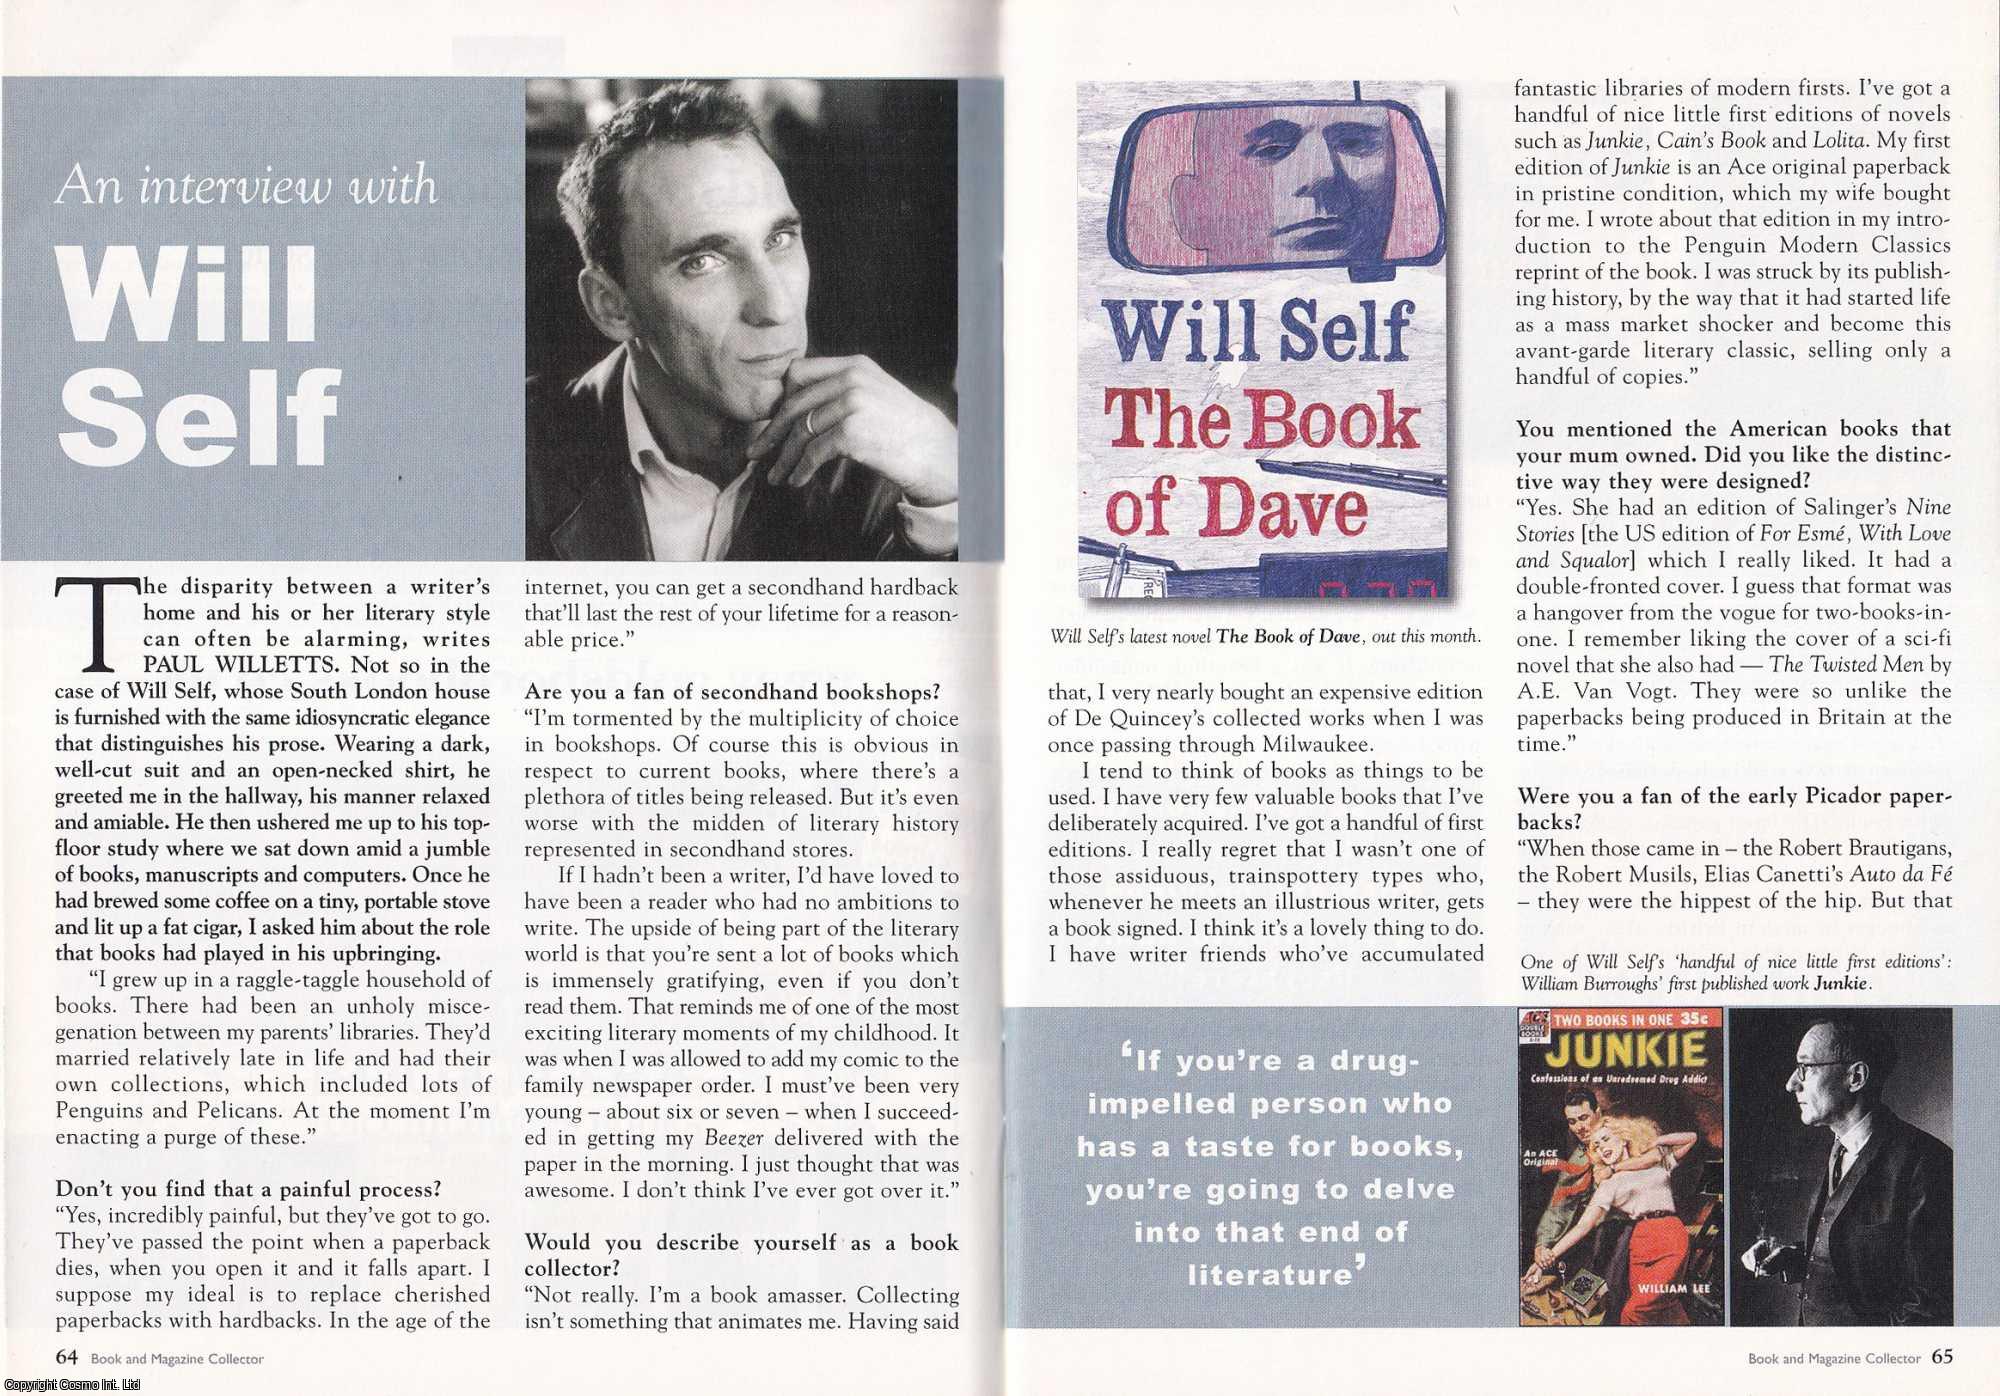 --- - An Interview with Will Self. This is an original article separated from an issue of The Book & Magazine Collector publication.